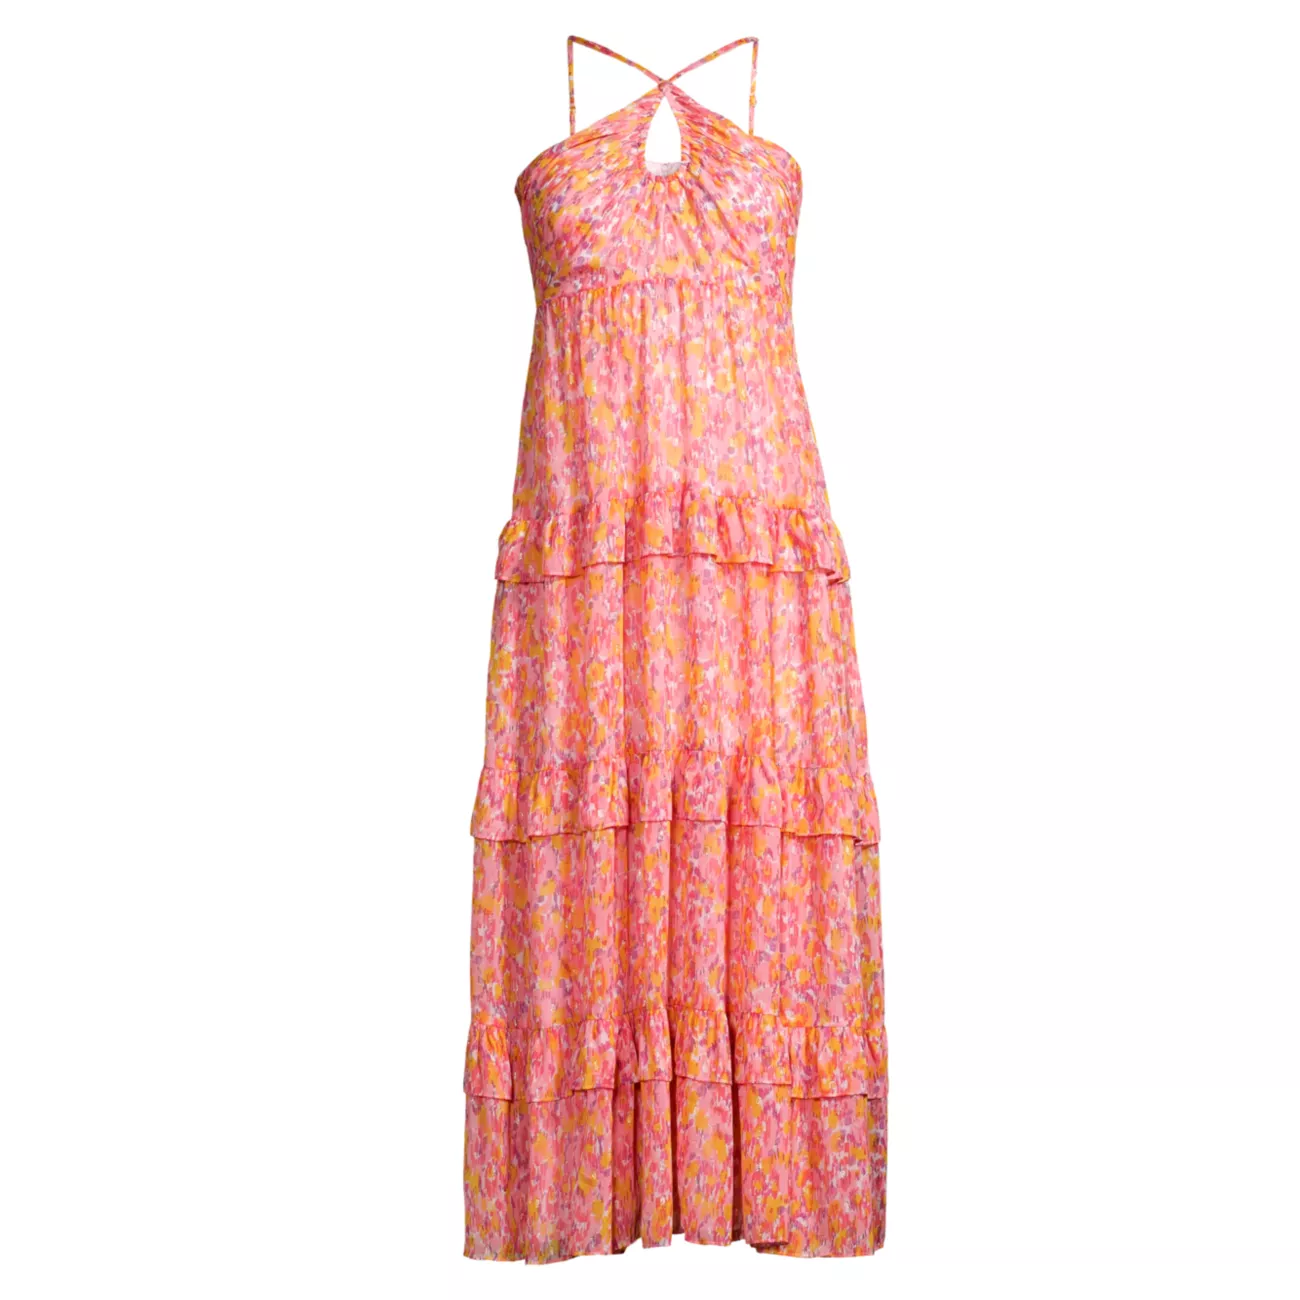 Danielle Floral-Printed Midi Dress Likely